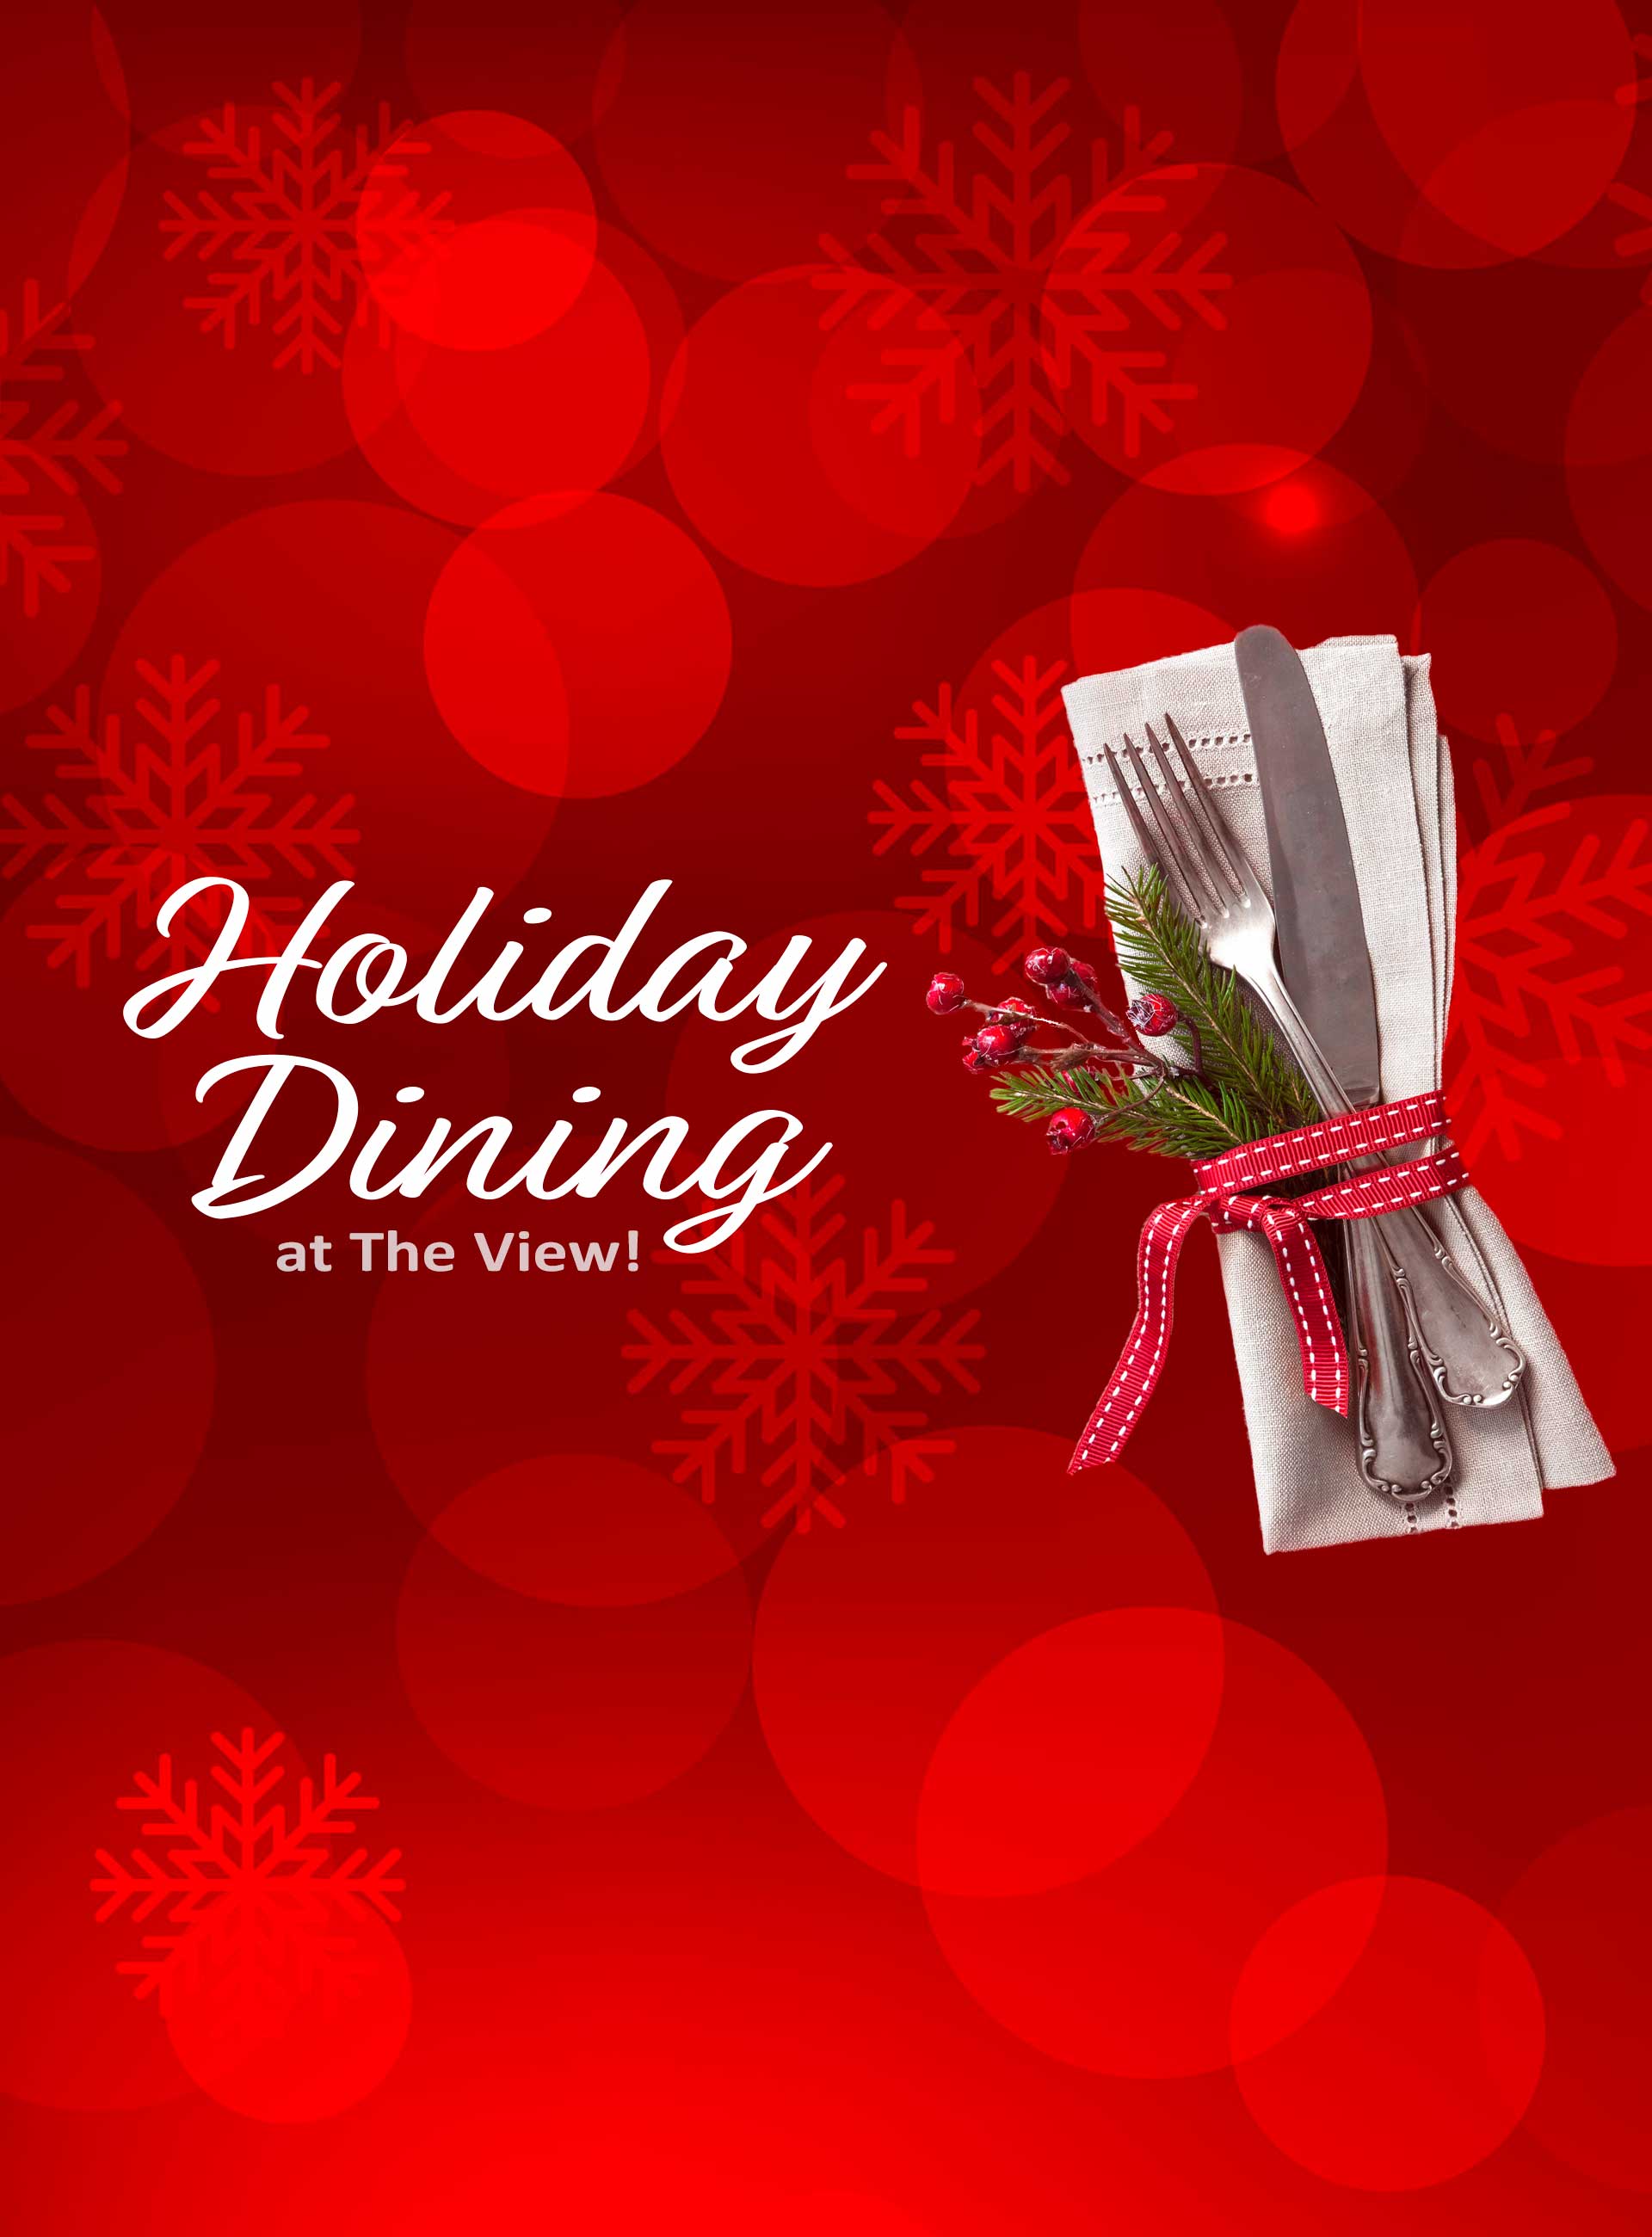 Christmas Dining at The View! Beach View & Island View Casinos